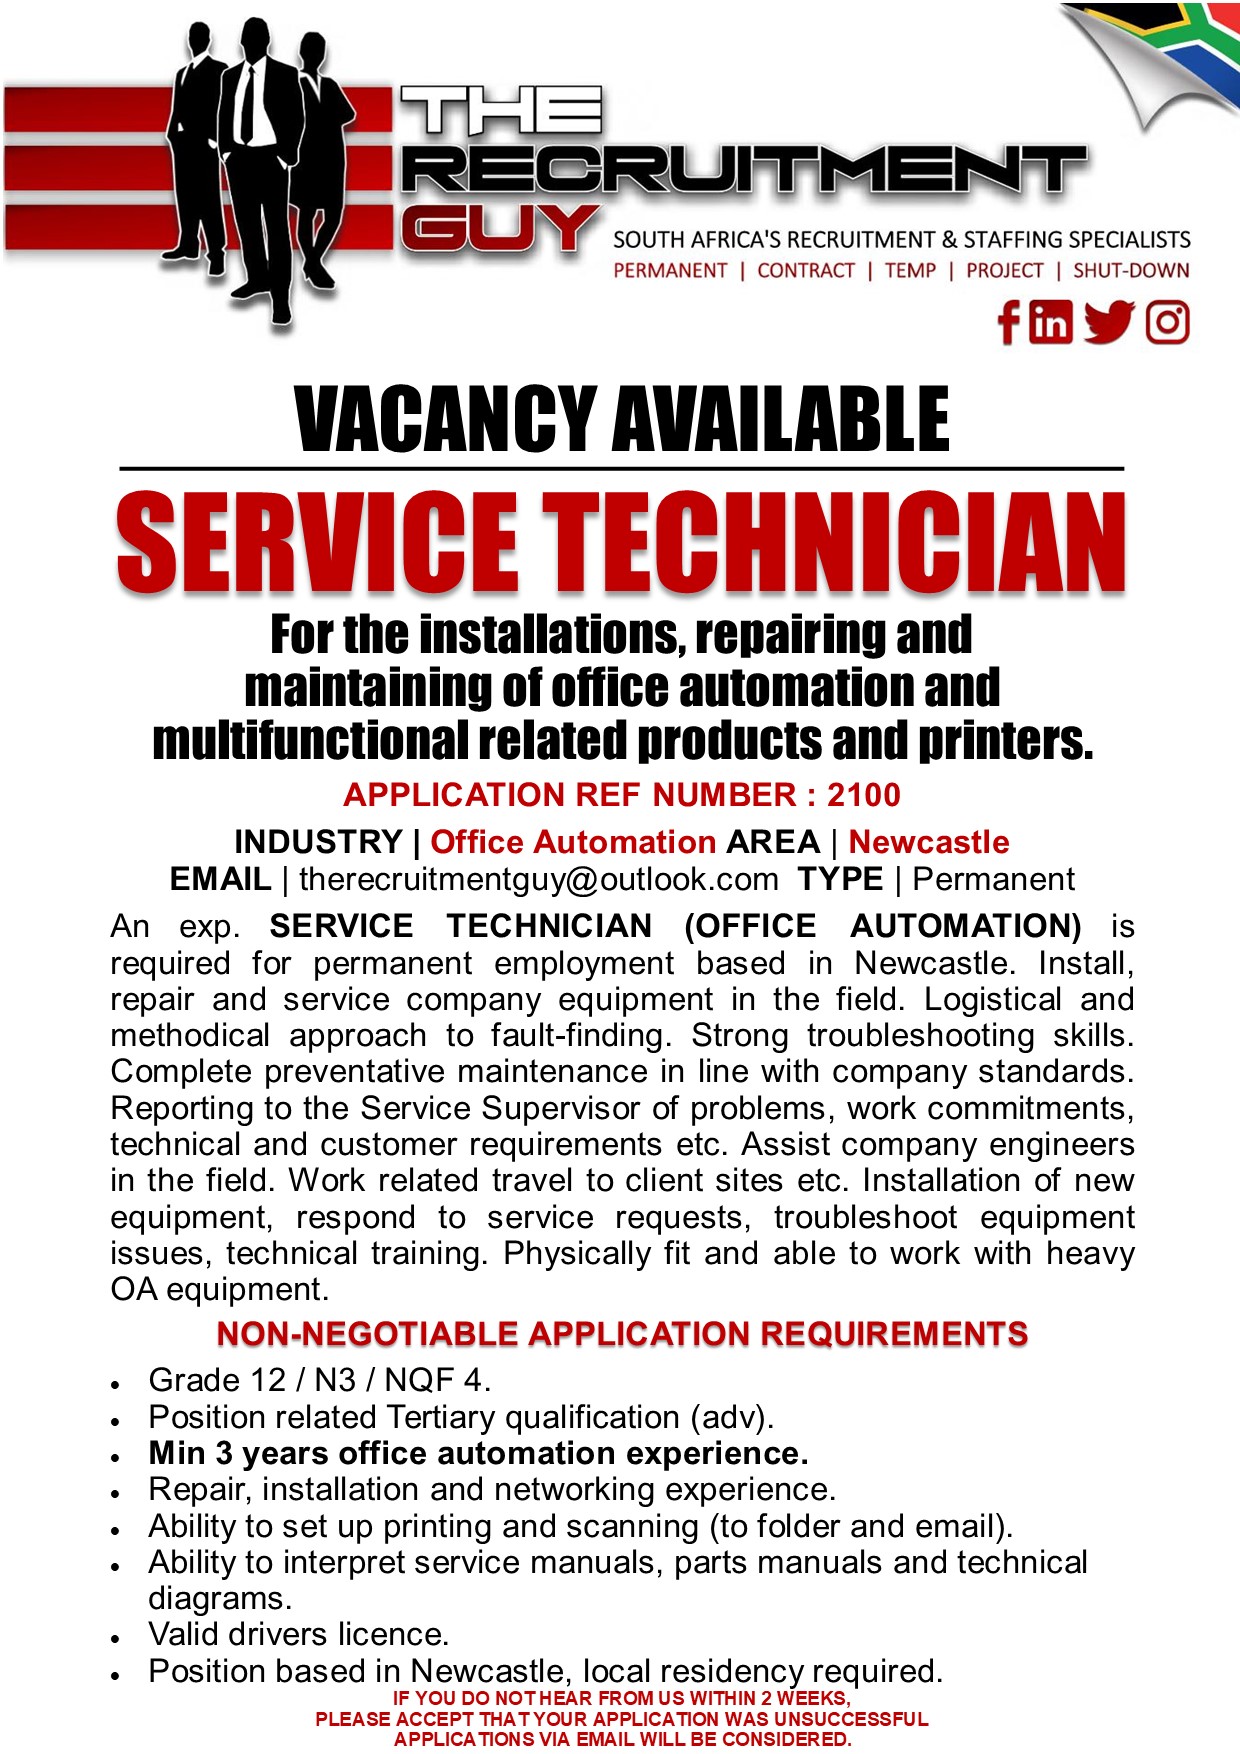 GUY SOUTH AFRICA'S RECRUITMENT &amp; STAFFING SPECIALISTS

PERMANENT | CONTRACT | TEMP | PROJECT | SHUT-DOWN

fRWEO
VACANCY AVAILABLE
SERVICE TECHNICIAN

For the installations, repairing and
maintaining of office automation and

multifunctional related products and printers.
APPLICATION REF NUMBER : 2100

INDUSTRY | Office Automation AREA | Newcastle
EMAIL | therecruitmentguy@outlook.com TYPE | Permanent

An exp. SERVICE TECHNICIAN (OFFICE AUTOMATION) is
required for permanent employment based in Newcastle. Install,
repair and service company equipment in the field. Logistical and
methodical approach to fault-finding. Strong troubleshooting skills.
Complete preventative maintenance in line with company standards.
Reporting to the Service Supervisor of problems, work commitments,
technical and customer requirements etc. Assist company engineers
in the field. Work related travel to client sites etc. Installation of new
equipment, respond to service requests, troubleshoot equipment
issues, technical training. Physically fit and able to work with heavy
OA equipment.
NON-NEGOTIABLE APPLICATION REQUIREMENTS

Grade 12 /N3/ NQF 4.

Position related Tertiary qualification (adv).

Min 3 years office automation experience.

Repair, installation and networking experience.

Ability to set up printing and scanning (to folder and email).
Ability to interpret service manuals, parts manuals and technical
diagrams.

. Valid drivers licence.

+ Position based in Newcastle, local residency required.

IF YOU DO NOTHEAR FROM US WITHIN 2 WEEKS,

PLEASE ACCEPT THAT YOUR APPLICATION WAS UNSUCCESSFUL
APPLICATIONS VIA EMAIL WILL BE CONSIDERED.